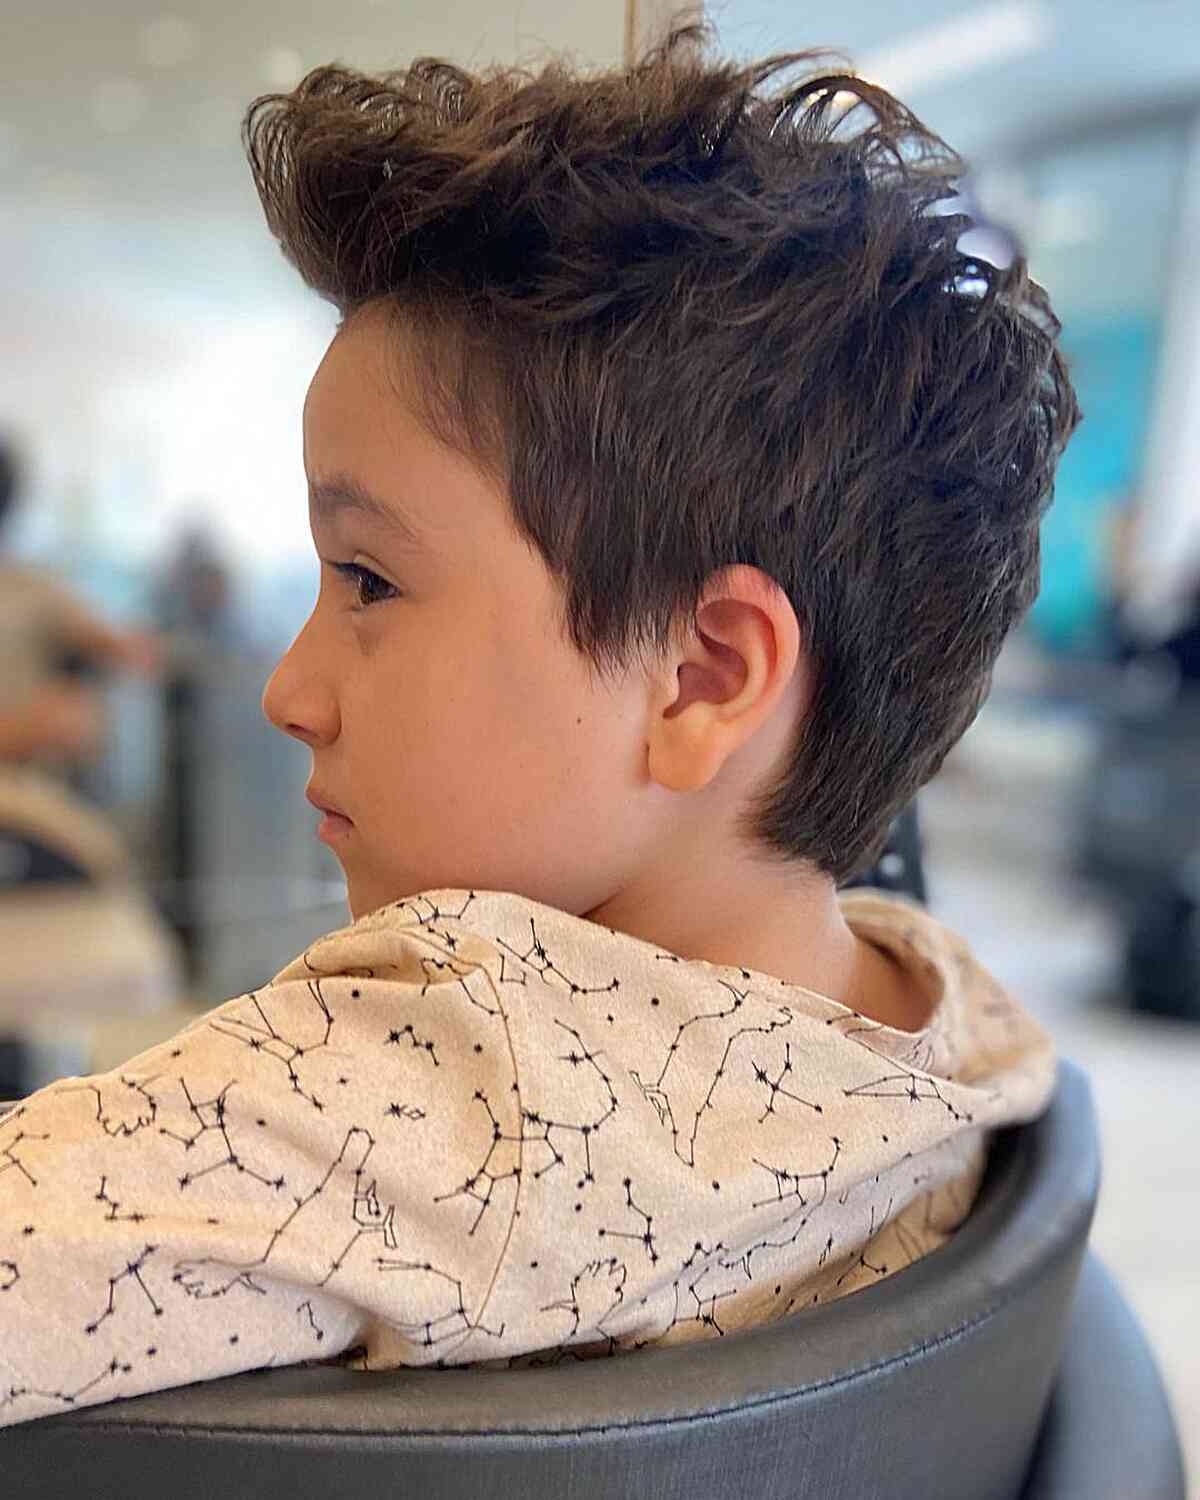 Top 25 One-Year-Old Boy Haircut Ideas – Child Insider